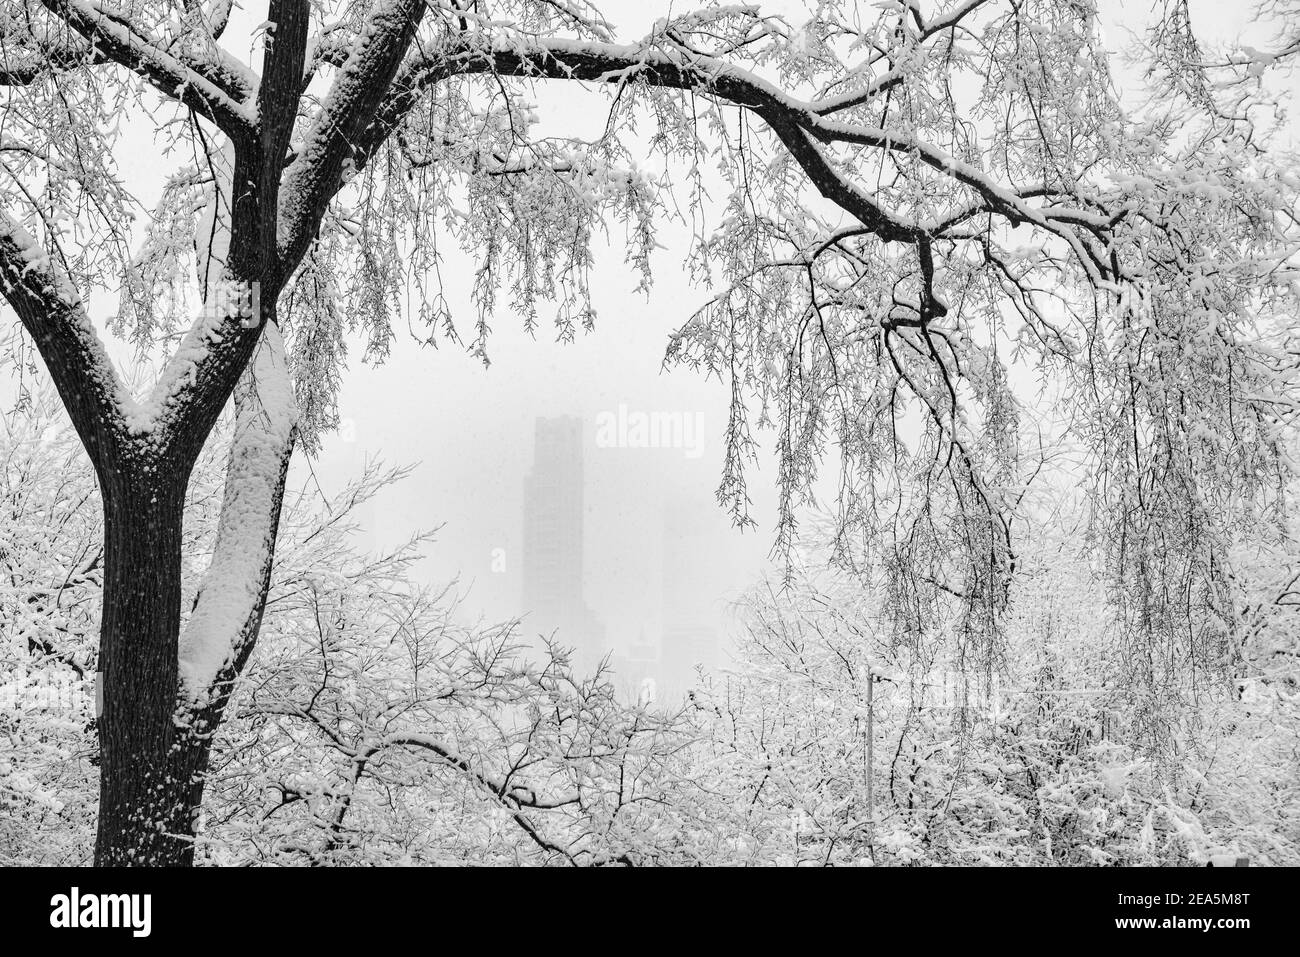 Black and white image of a tree covered in snow hanging during a nor'easter in Central Park, New York City. Stock Photo